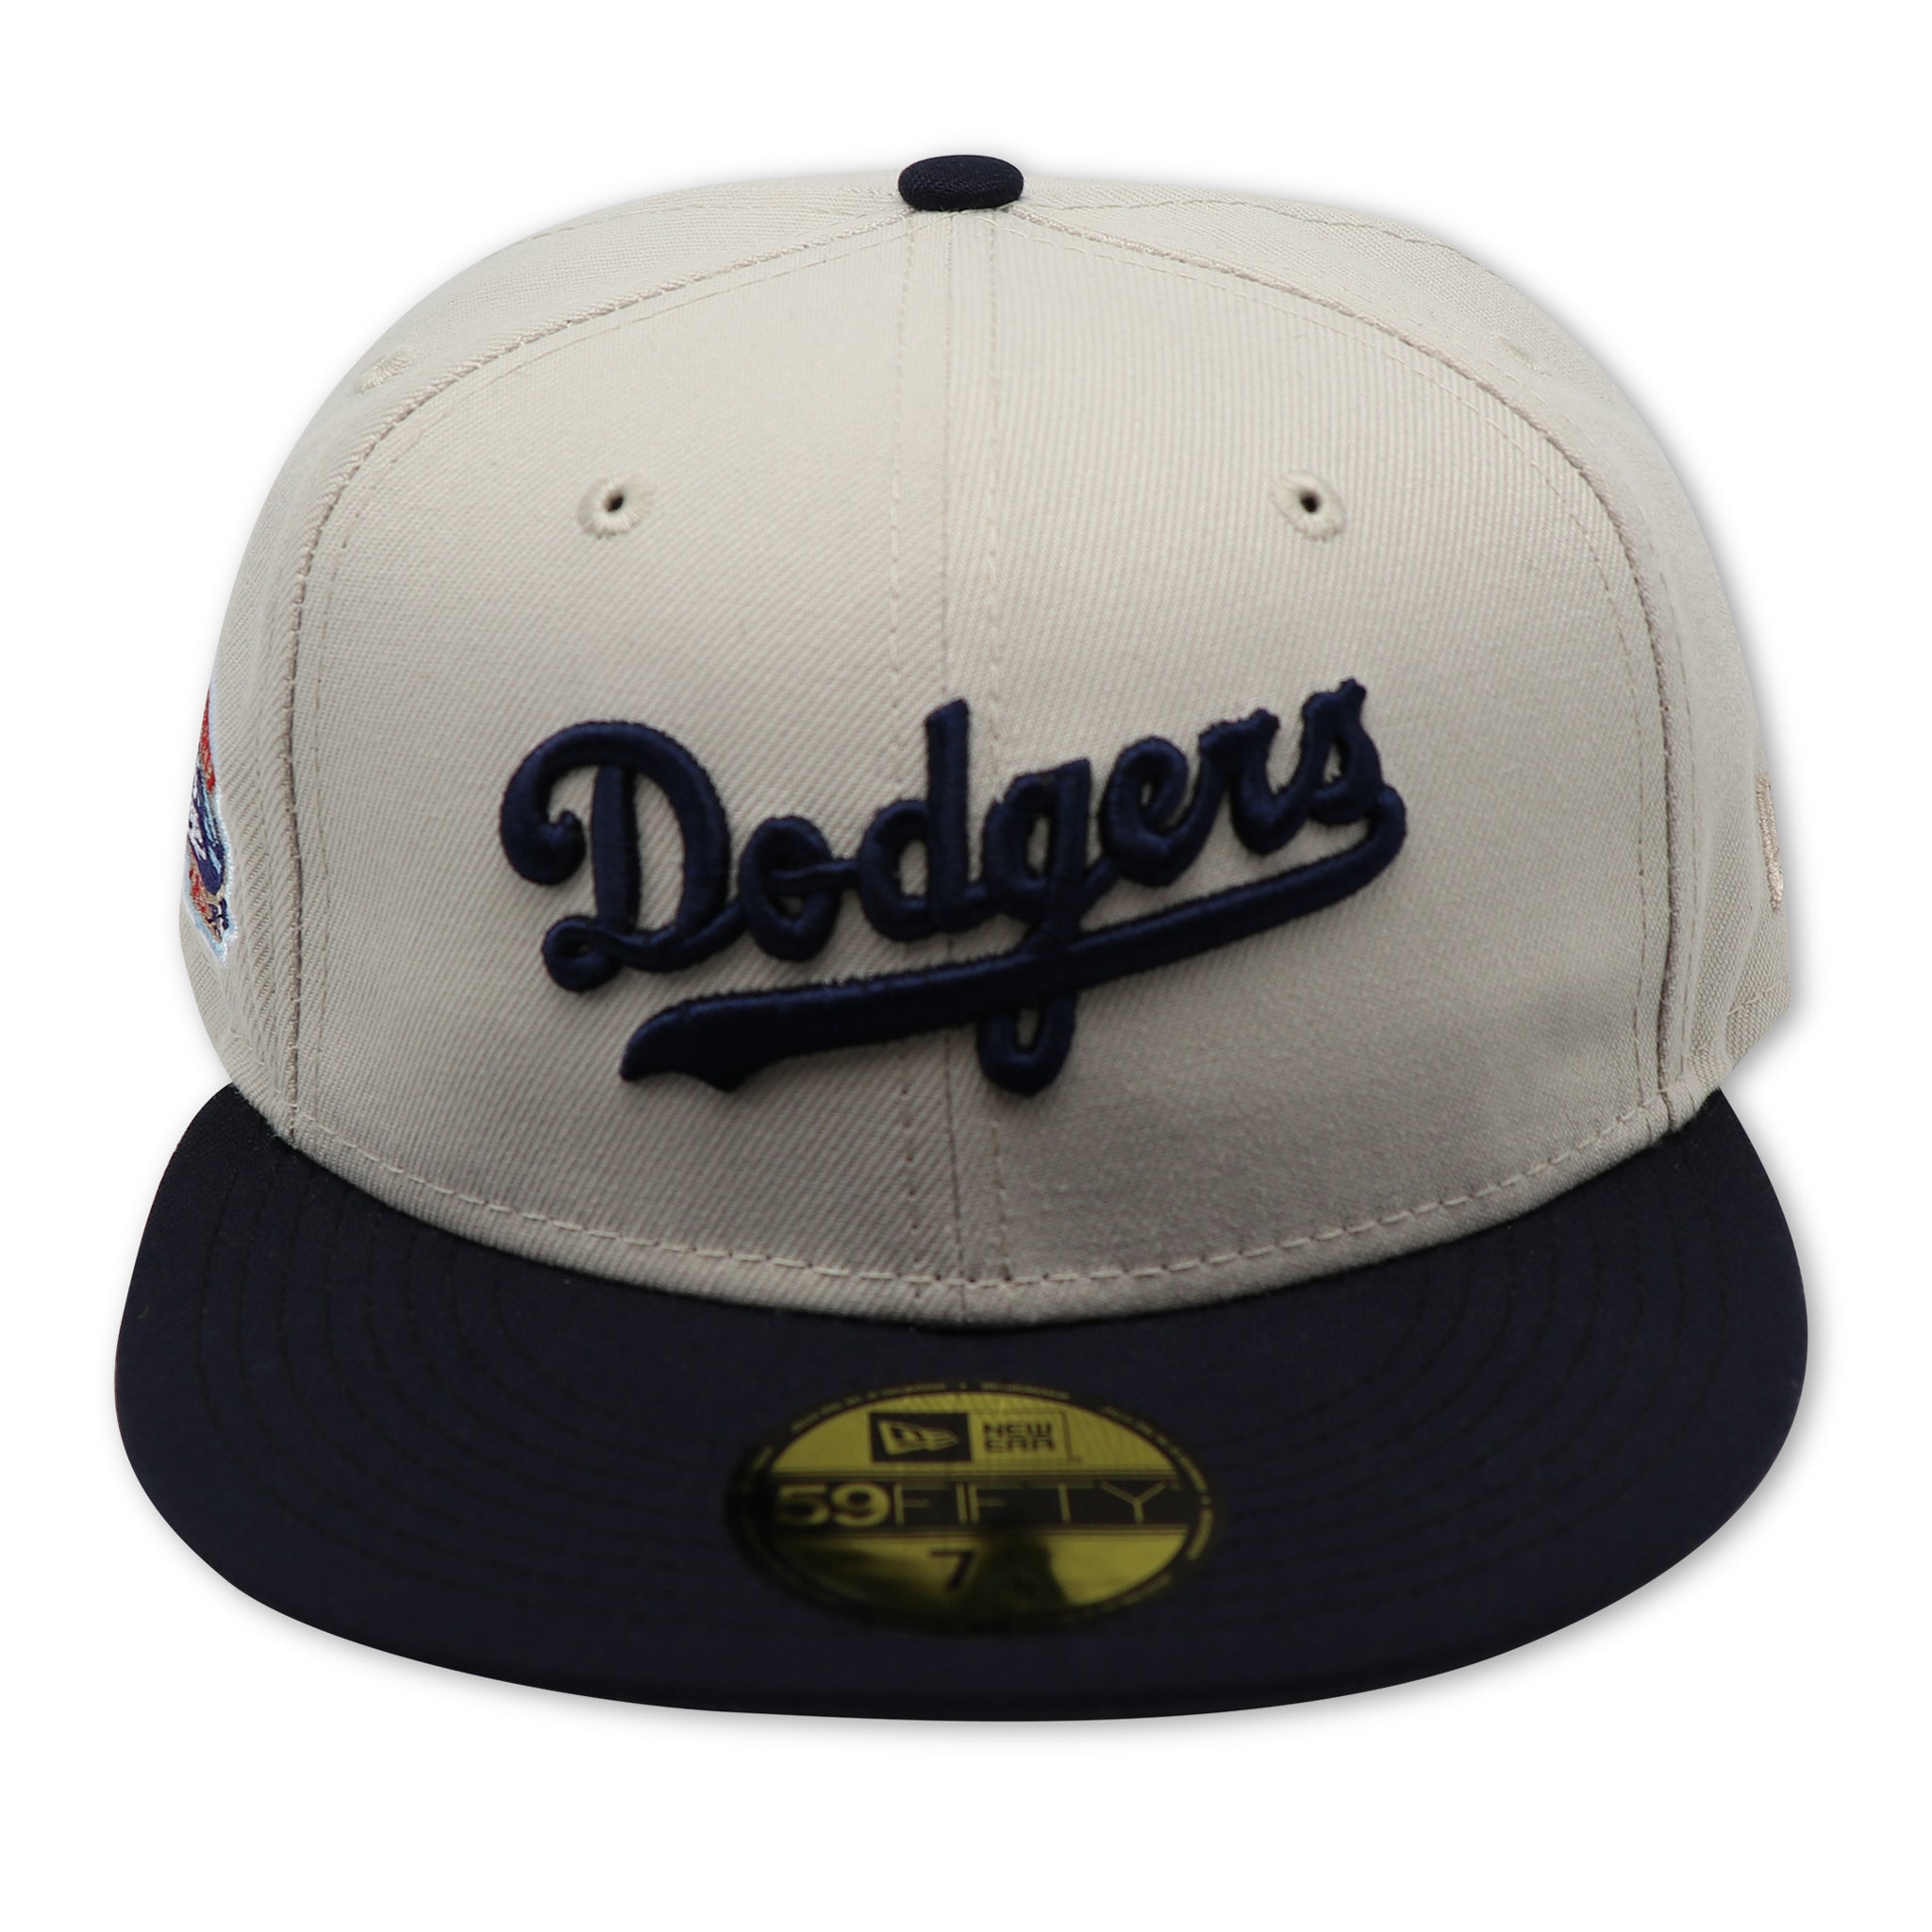 BROOKLYN DODGERS (STONE) (1955 WORLDSERIES CHAMPIONS) NEW ERA 59FIFTY FITTED